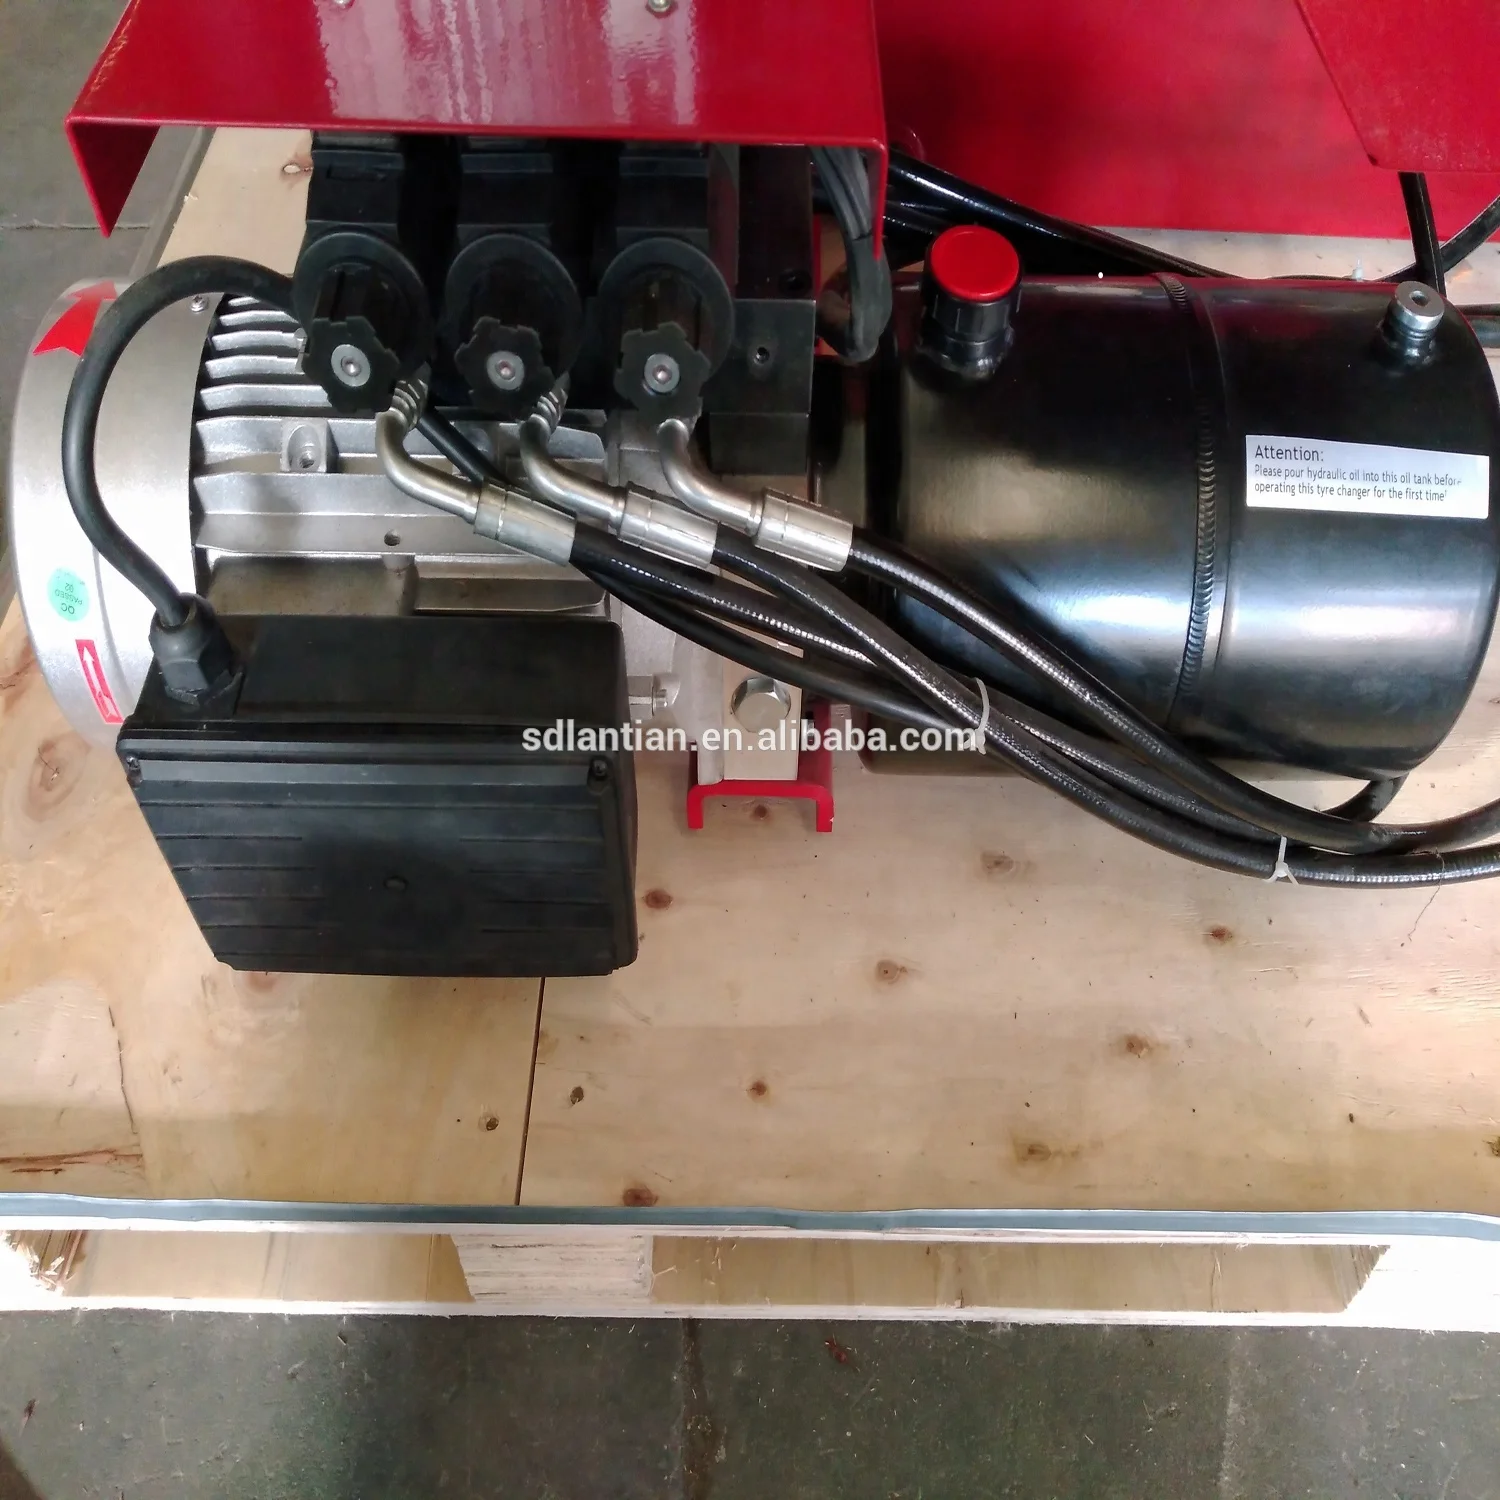 
Bluesky truck tyre changer/tyre changing machine/truck tire changer for sale 